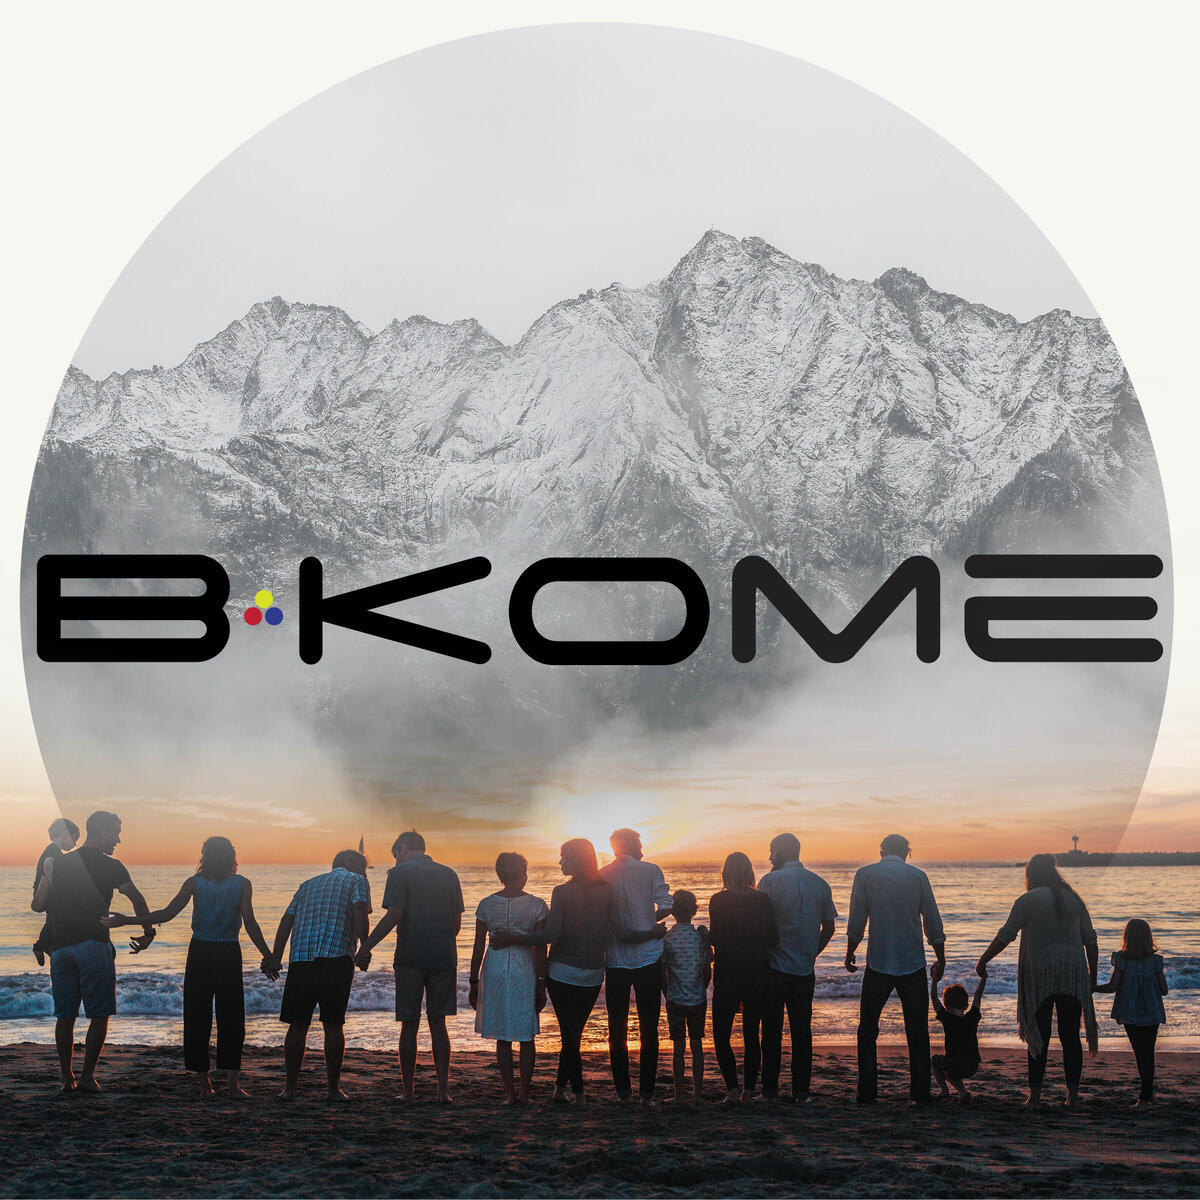 BKOME logo mixed with a photo showing many people together at the beach looking at the sunrise.